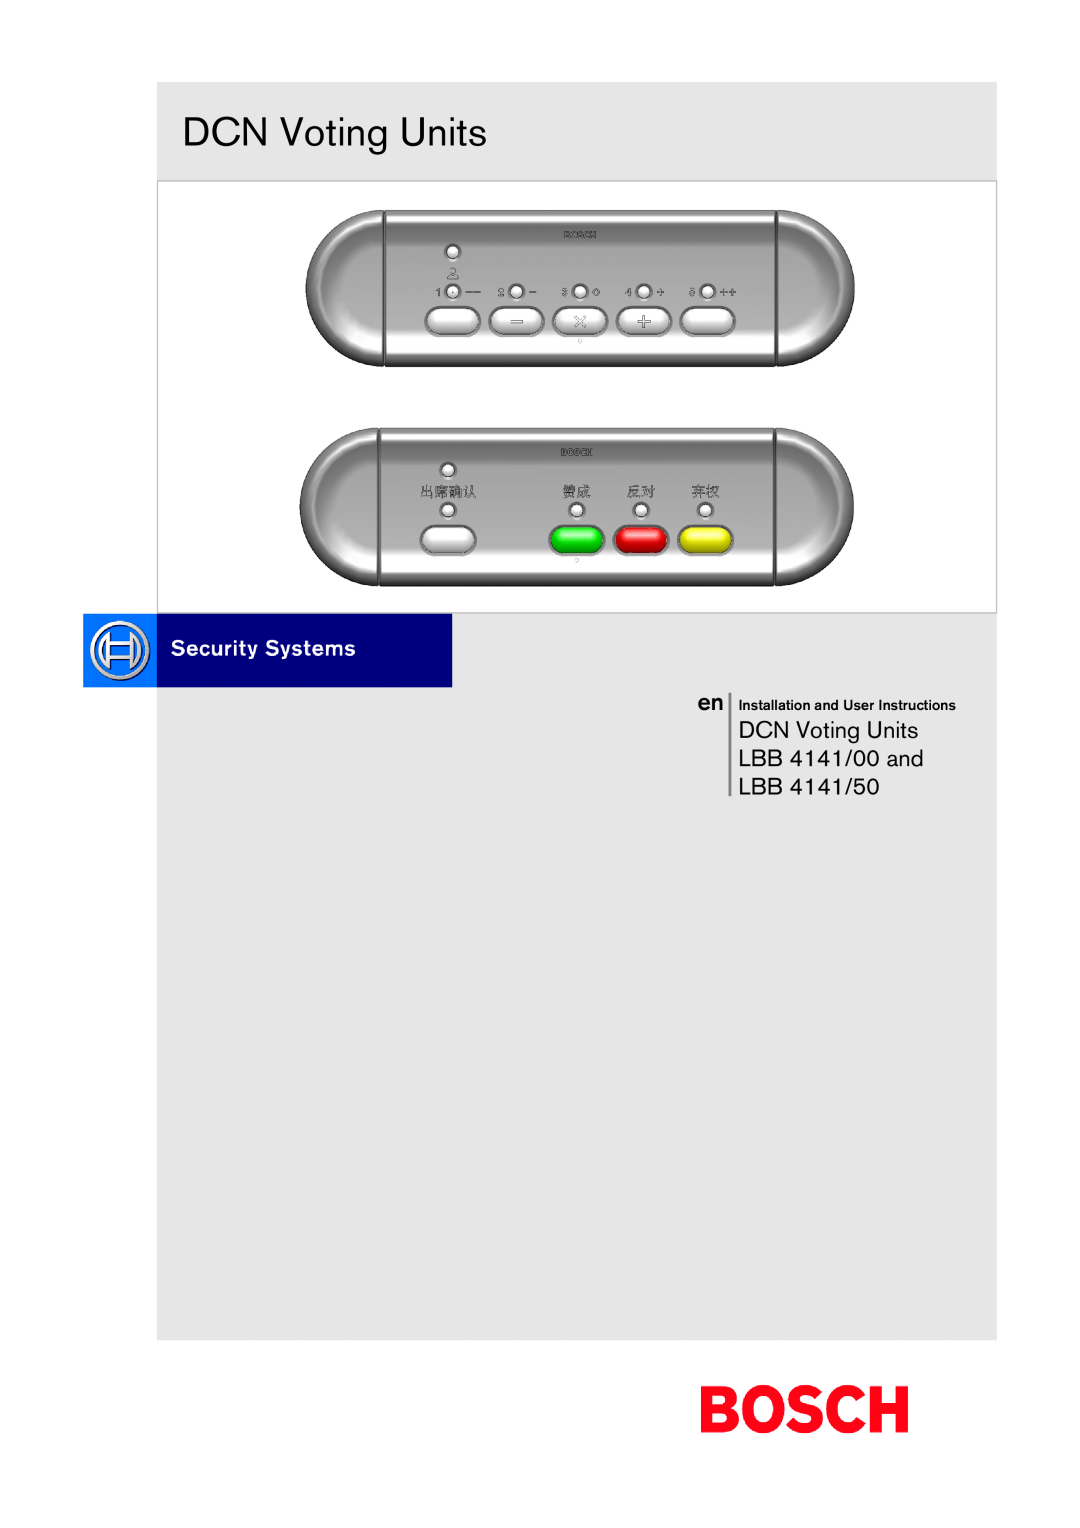 Bosch Appliances manual DCN Voting Units LBB 4141/00 and LBB 4141/50, Installation and User Instructions 